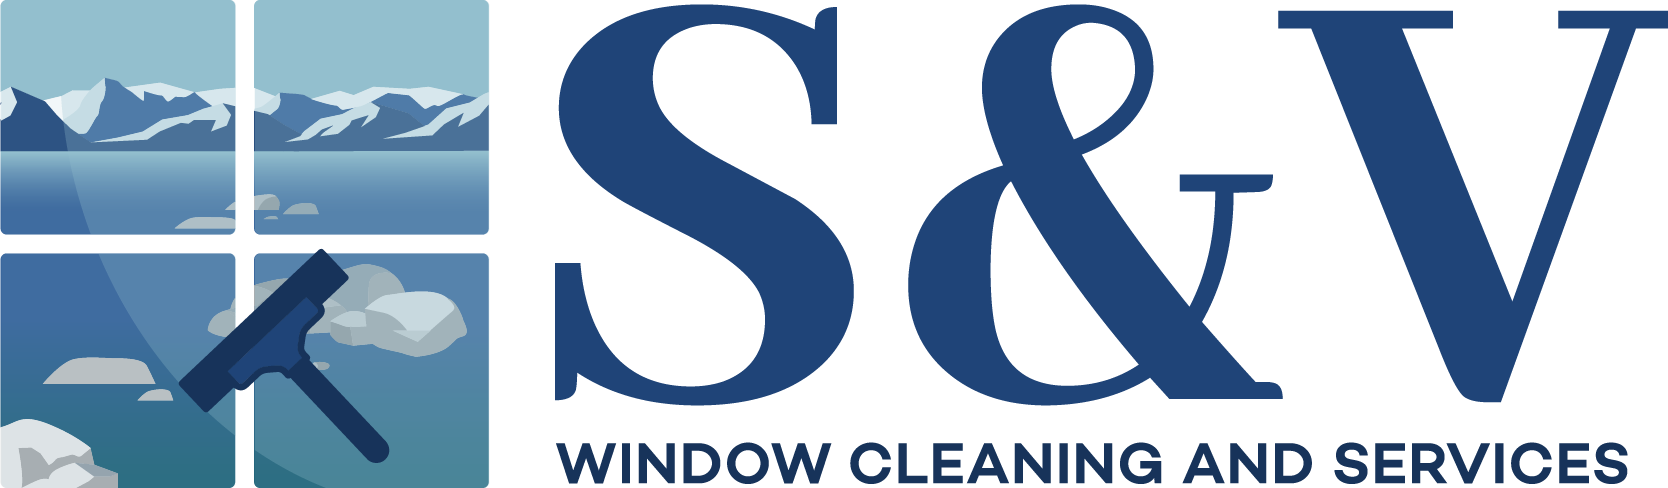 S&V Window Cleaning and Services Logo full color